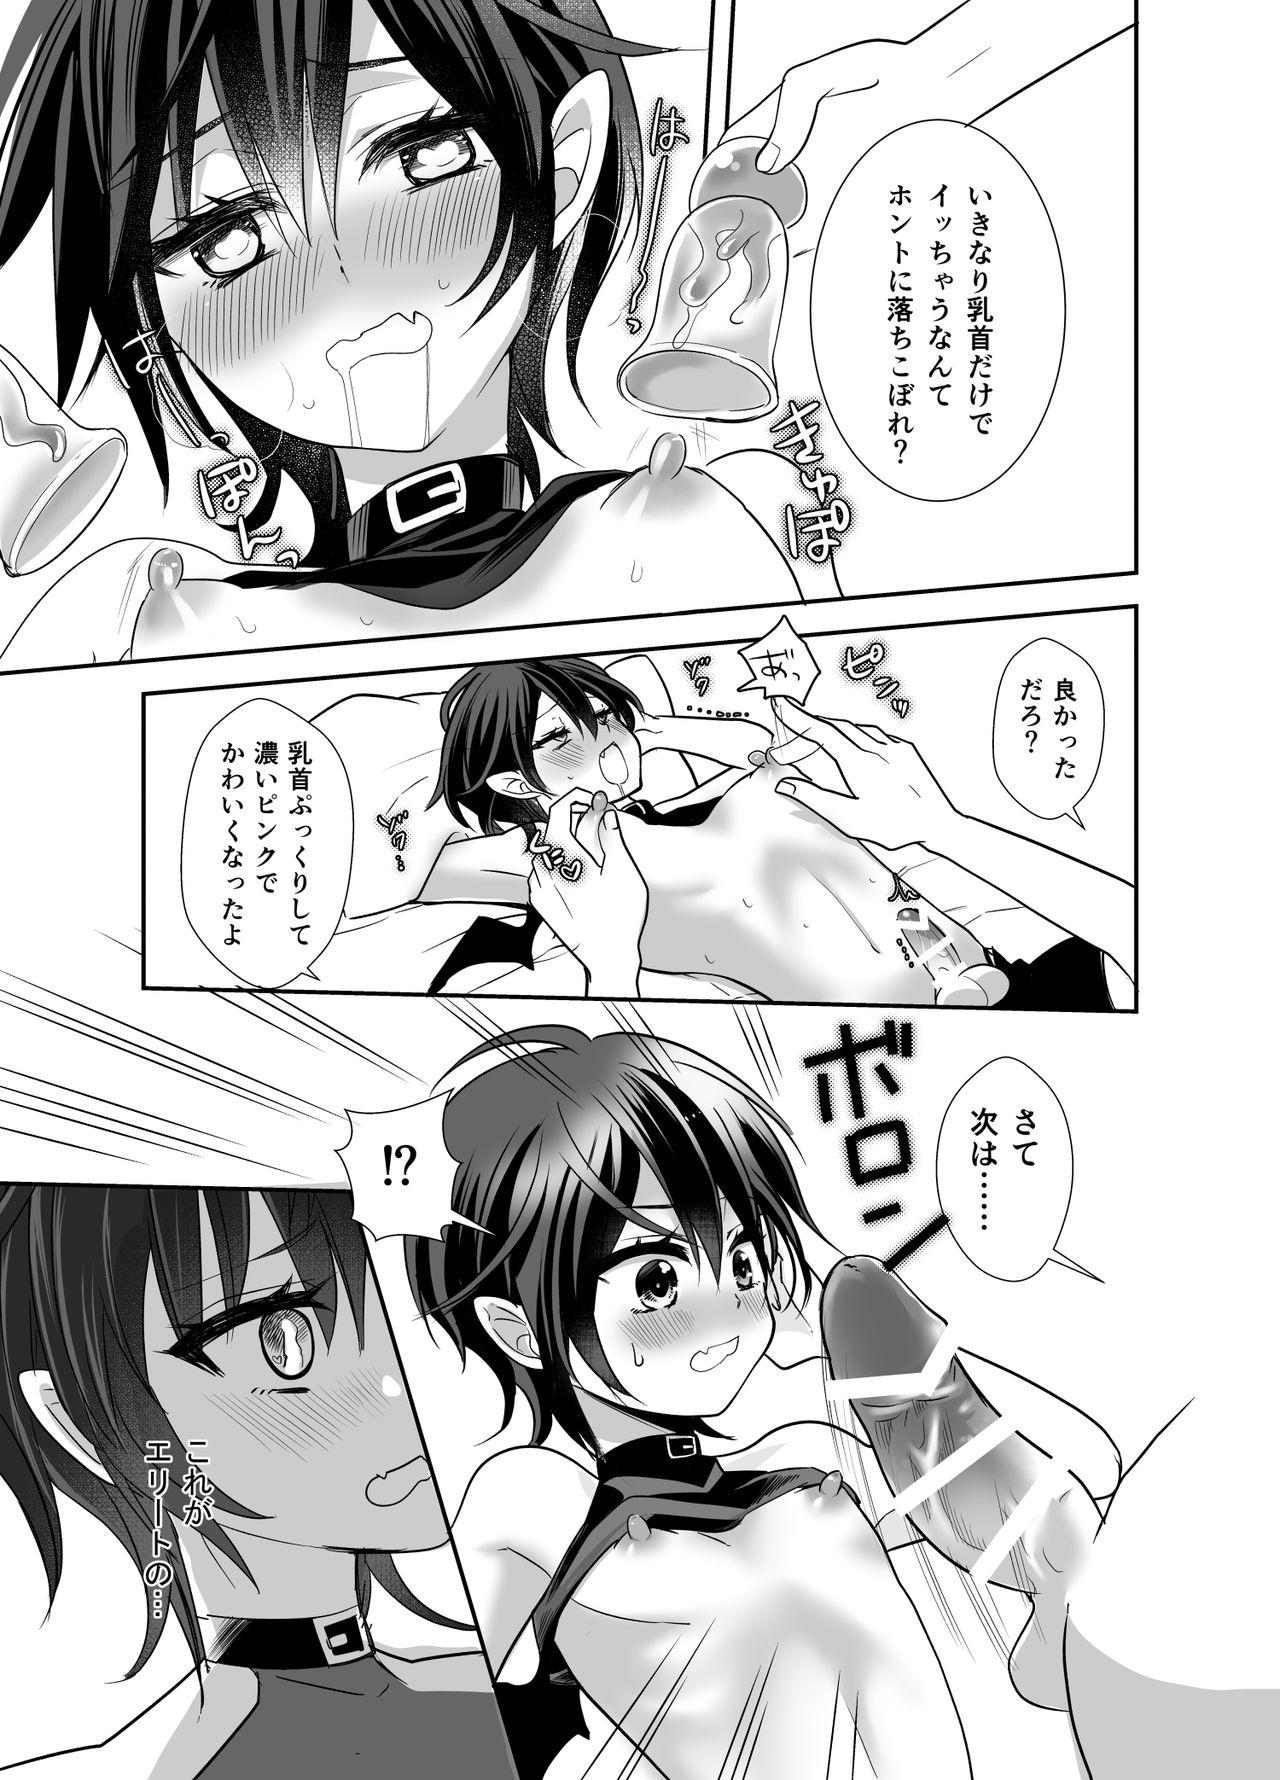 Nice Tits 転生したらエリート淫魔でした - Original Striptease - Page 12